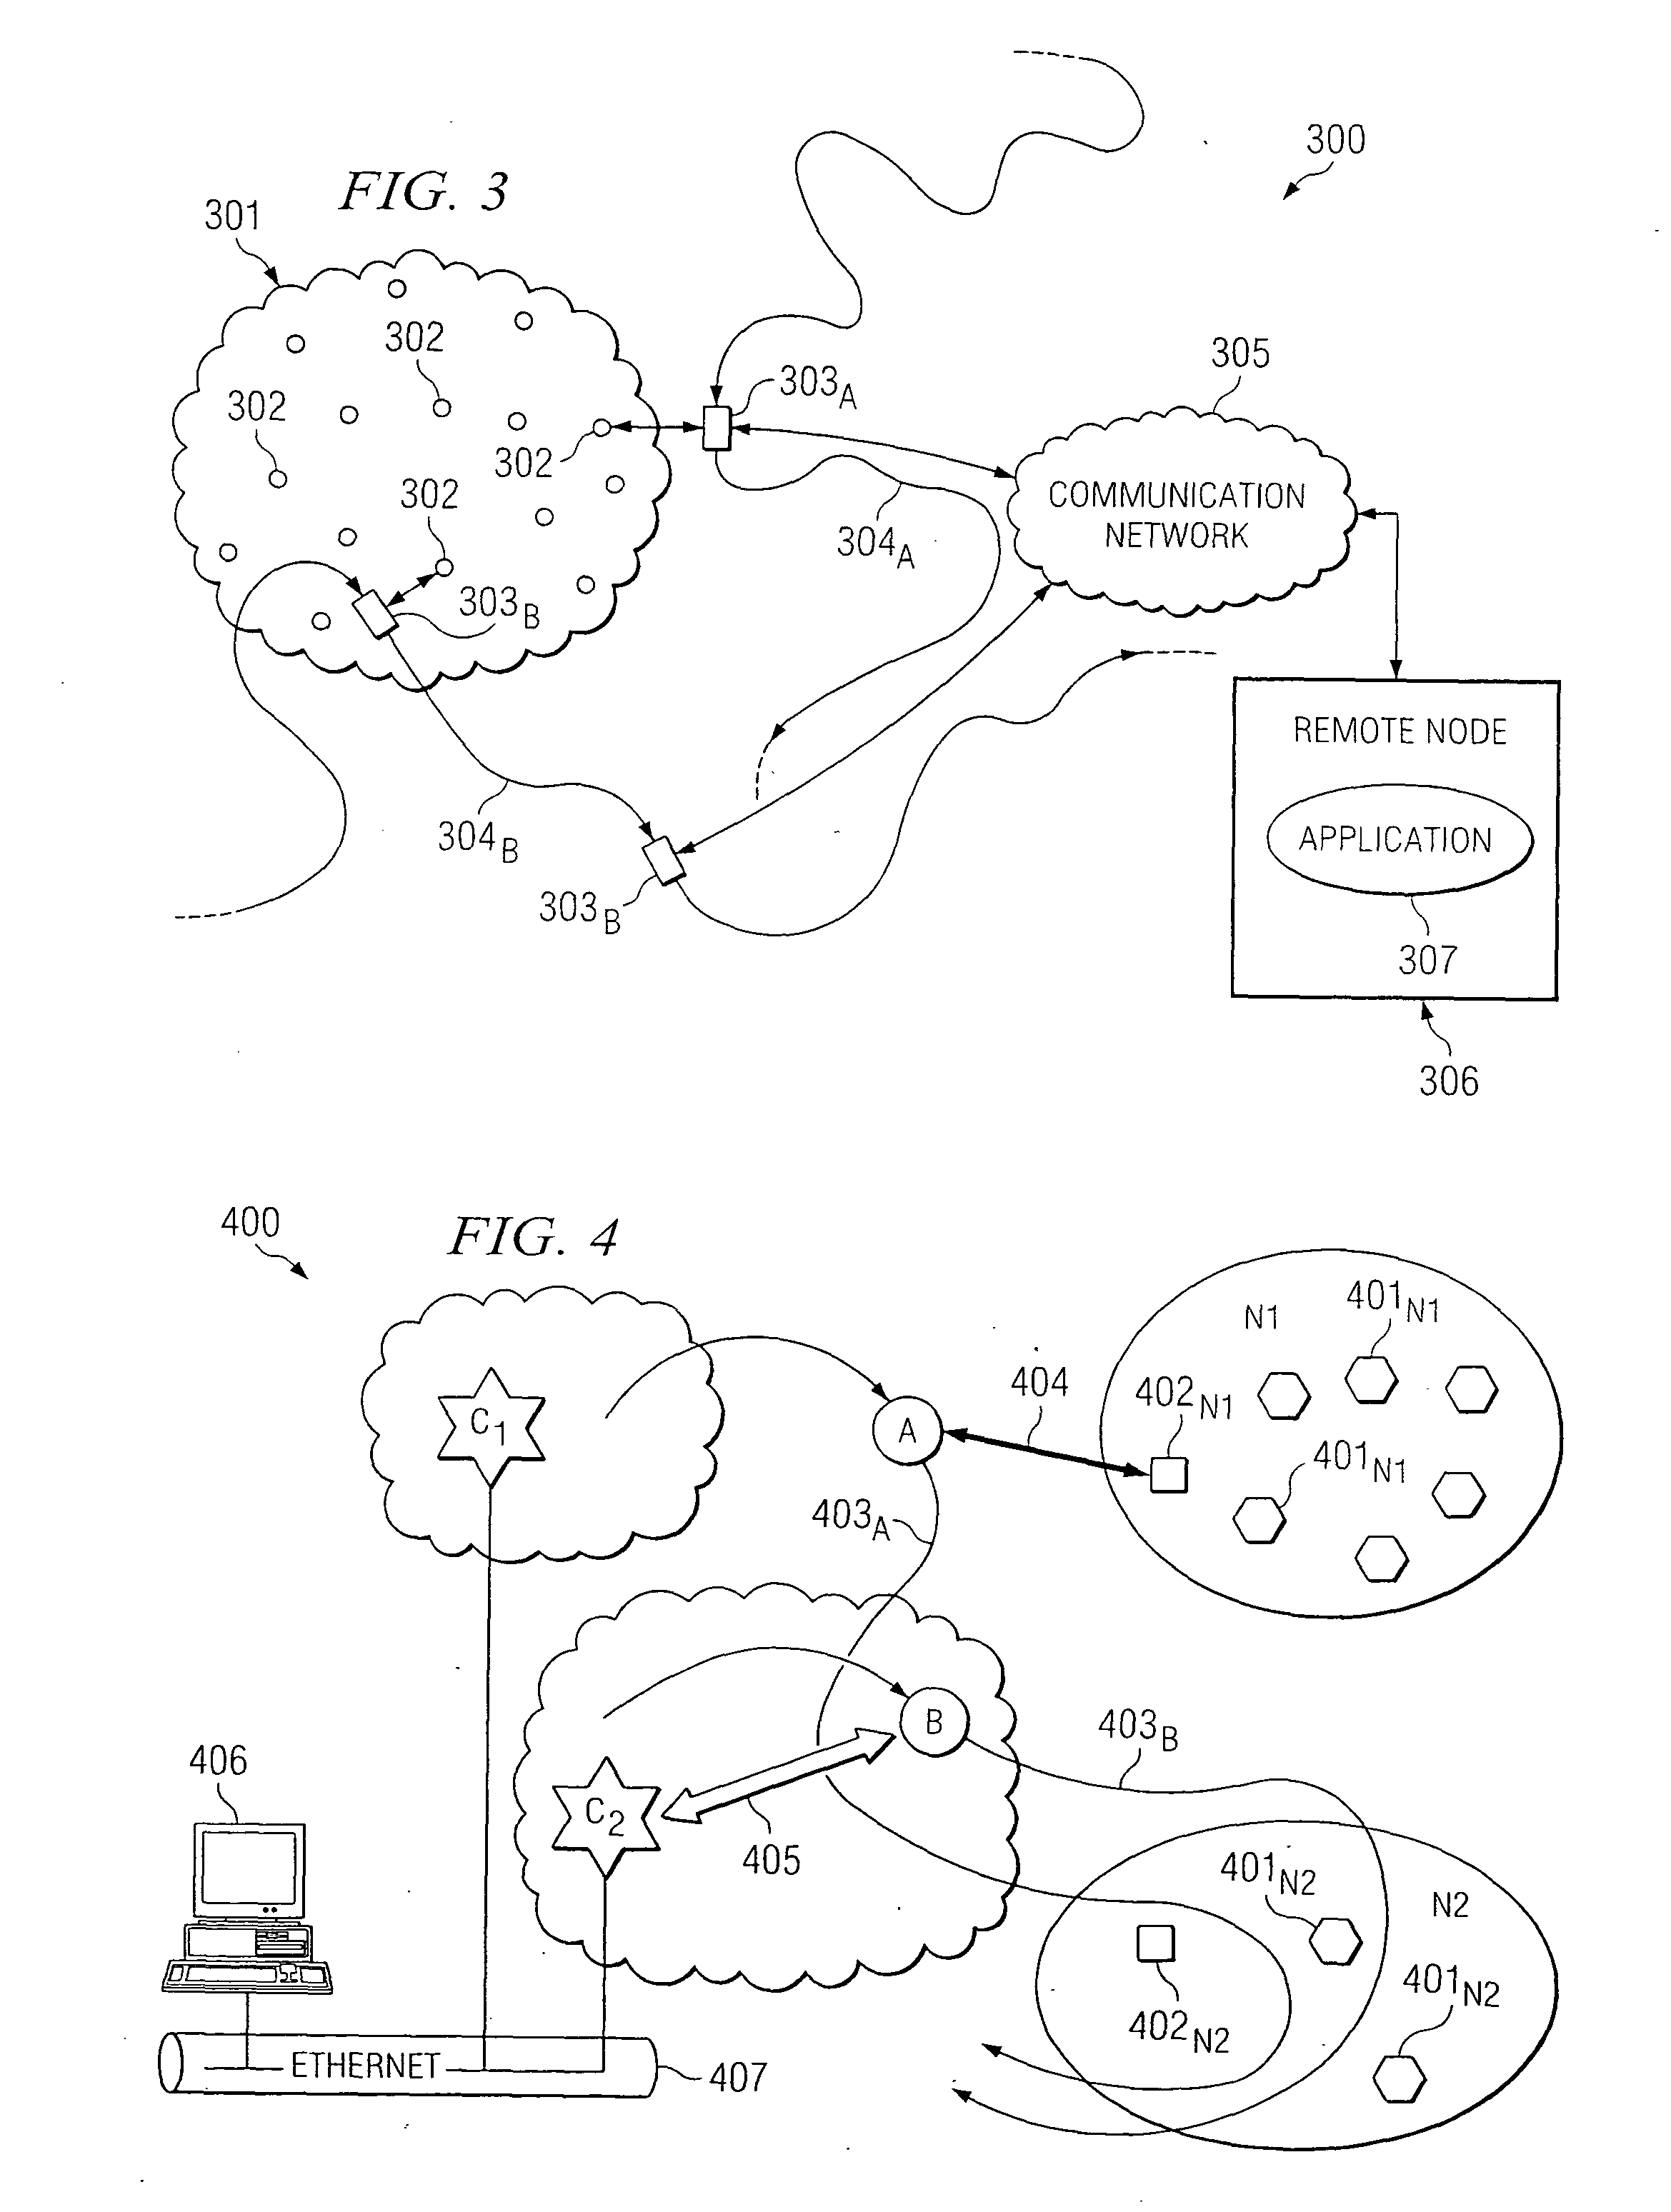 System and method for using mobile collectors for accessing a wireless sensor network